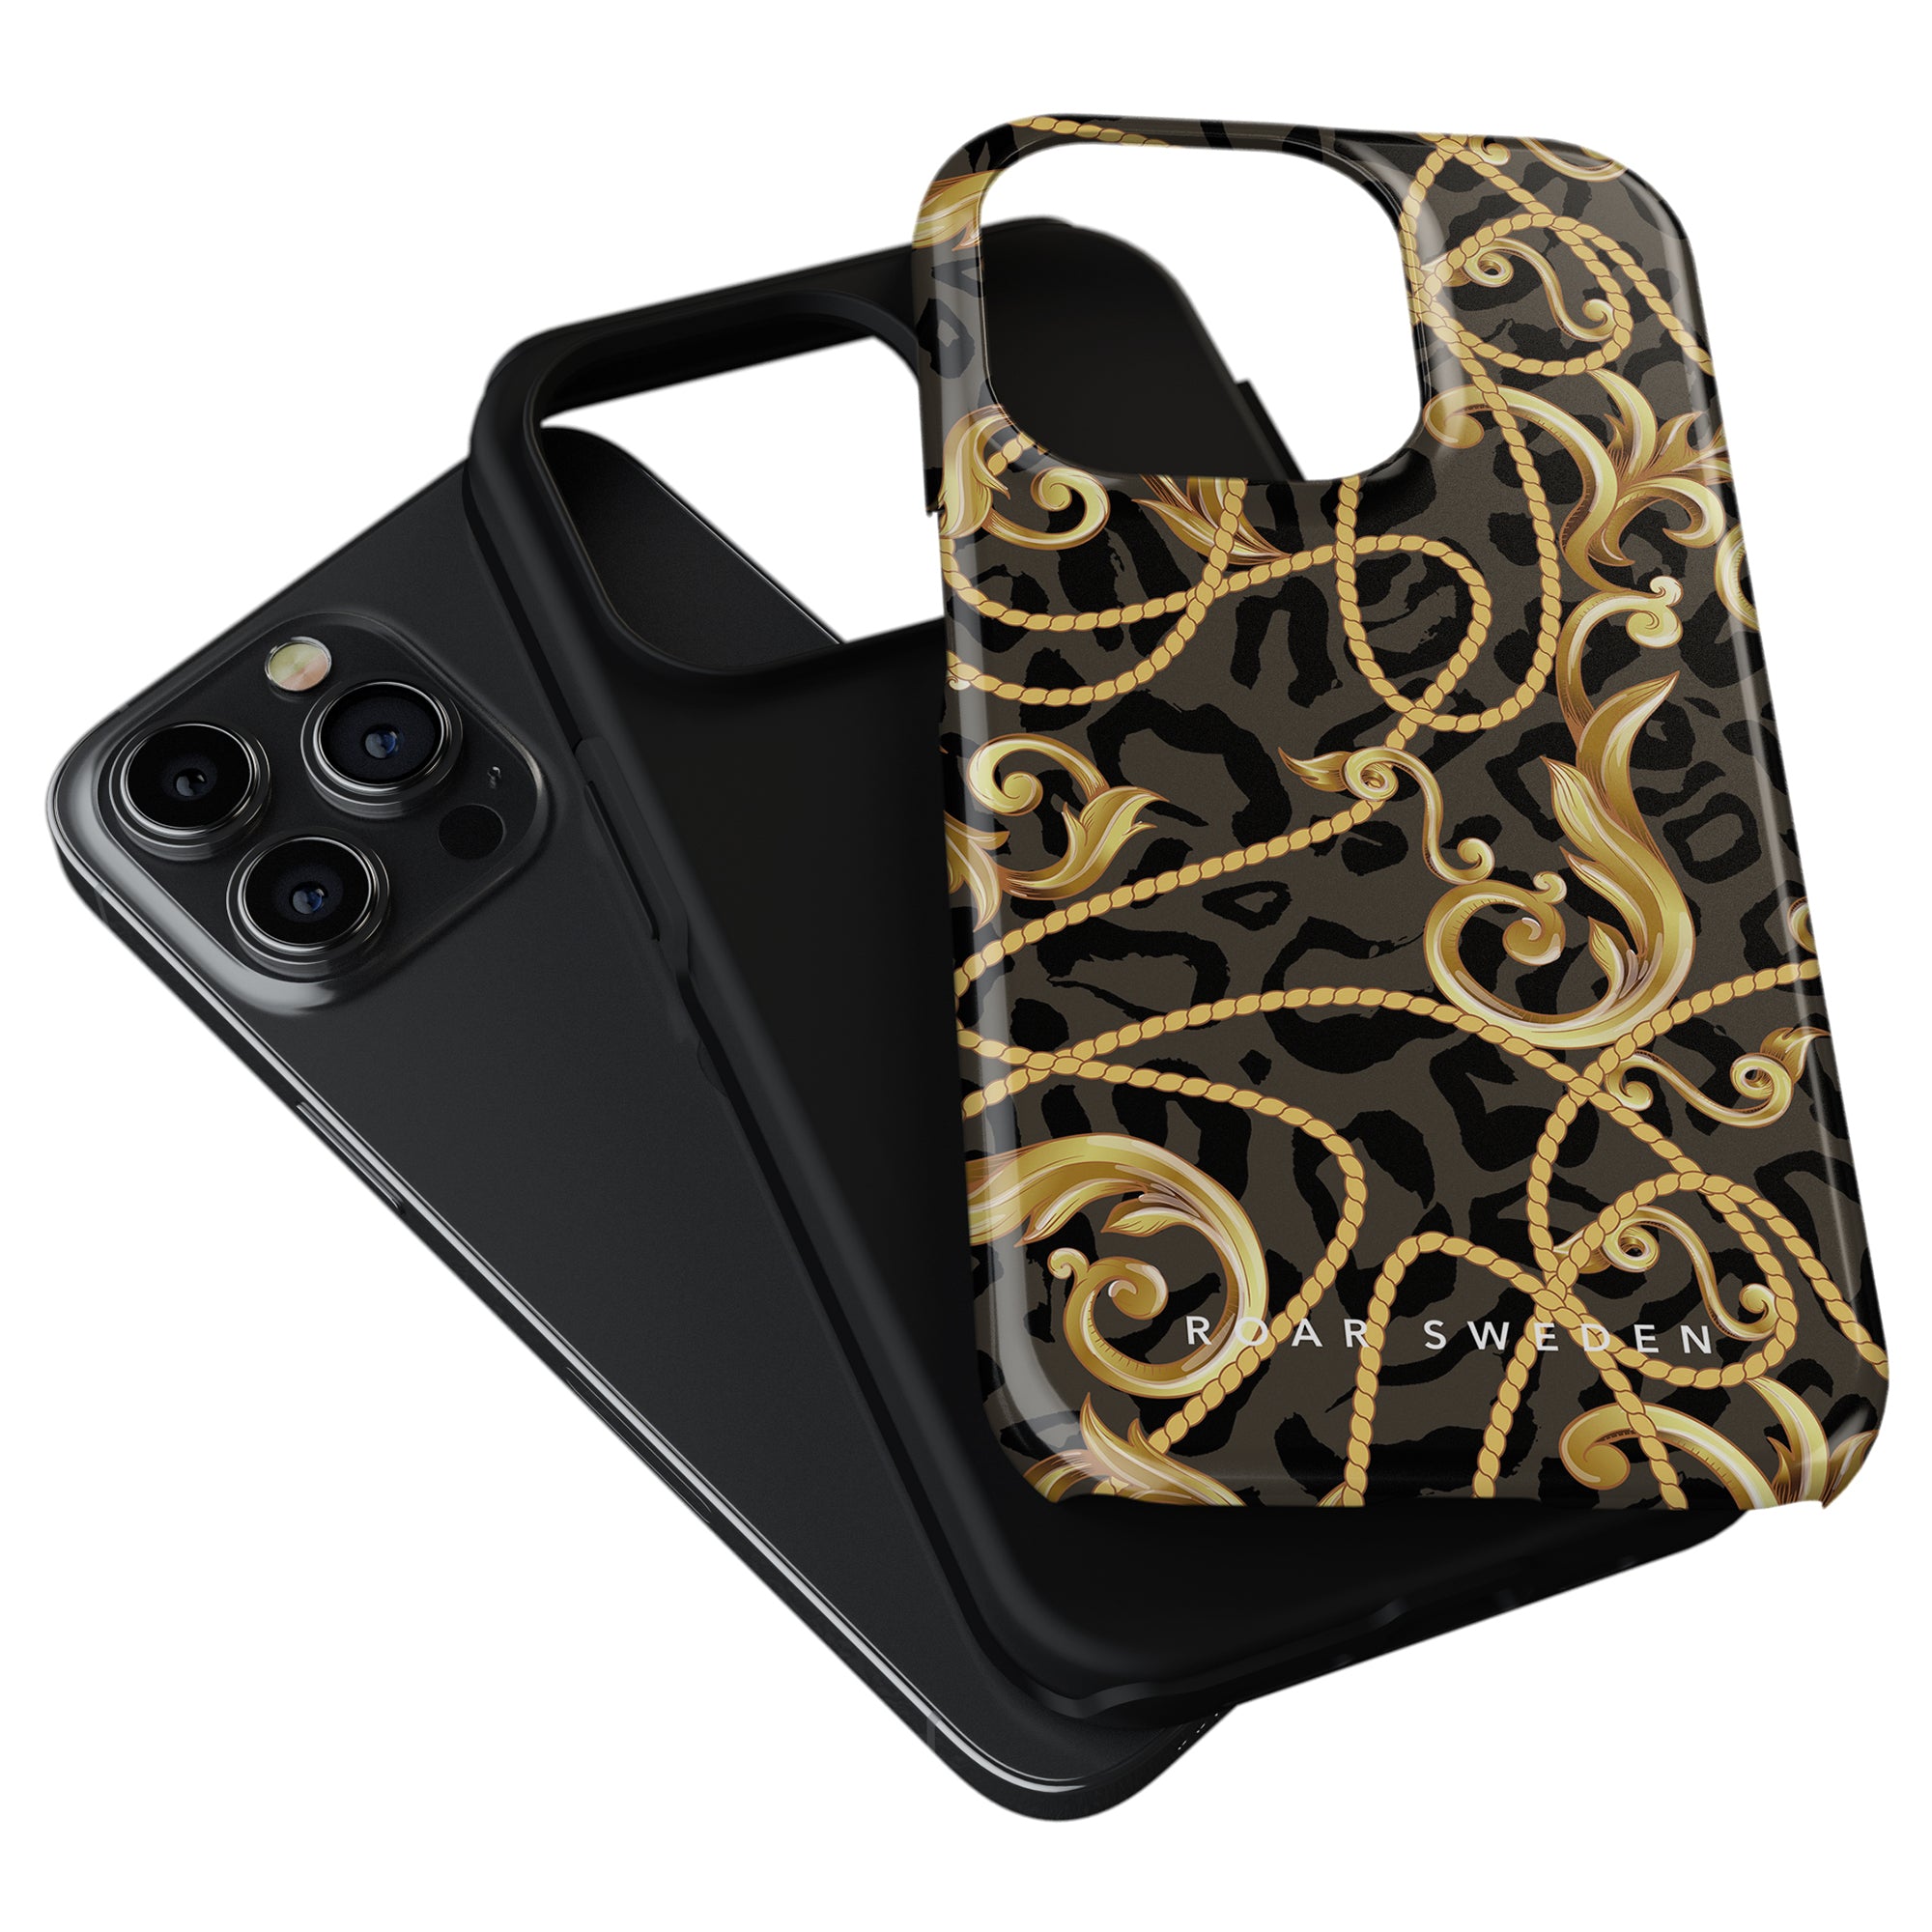 A sleek black and gold Baroque - Tough Case designed specifically for the stylish iPhone 11.